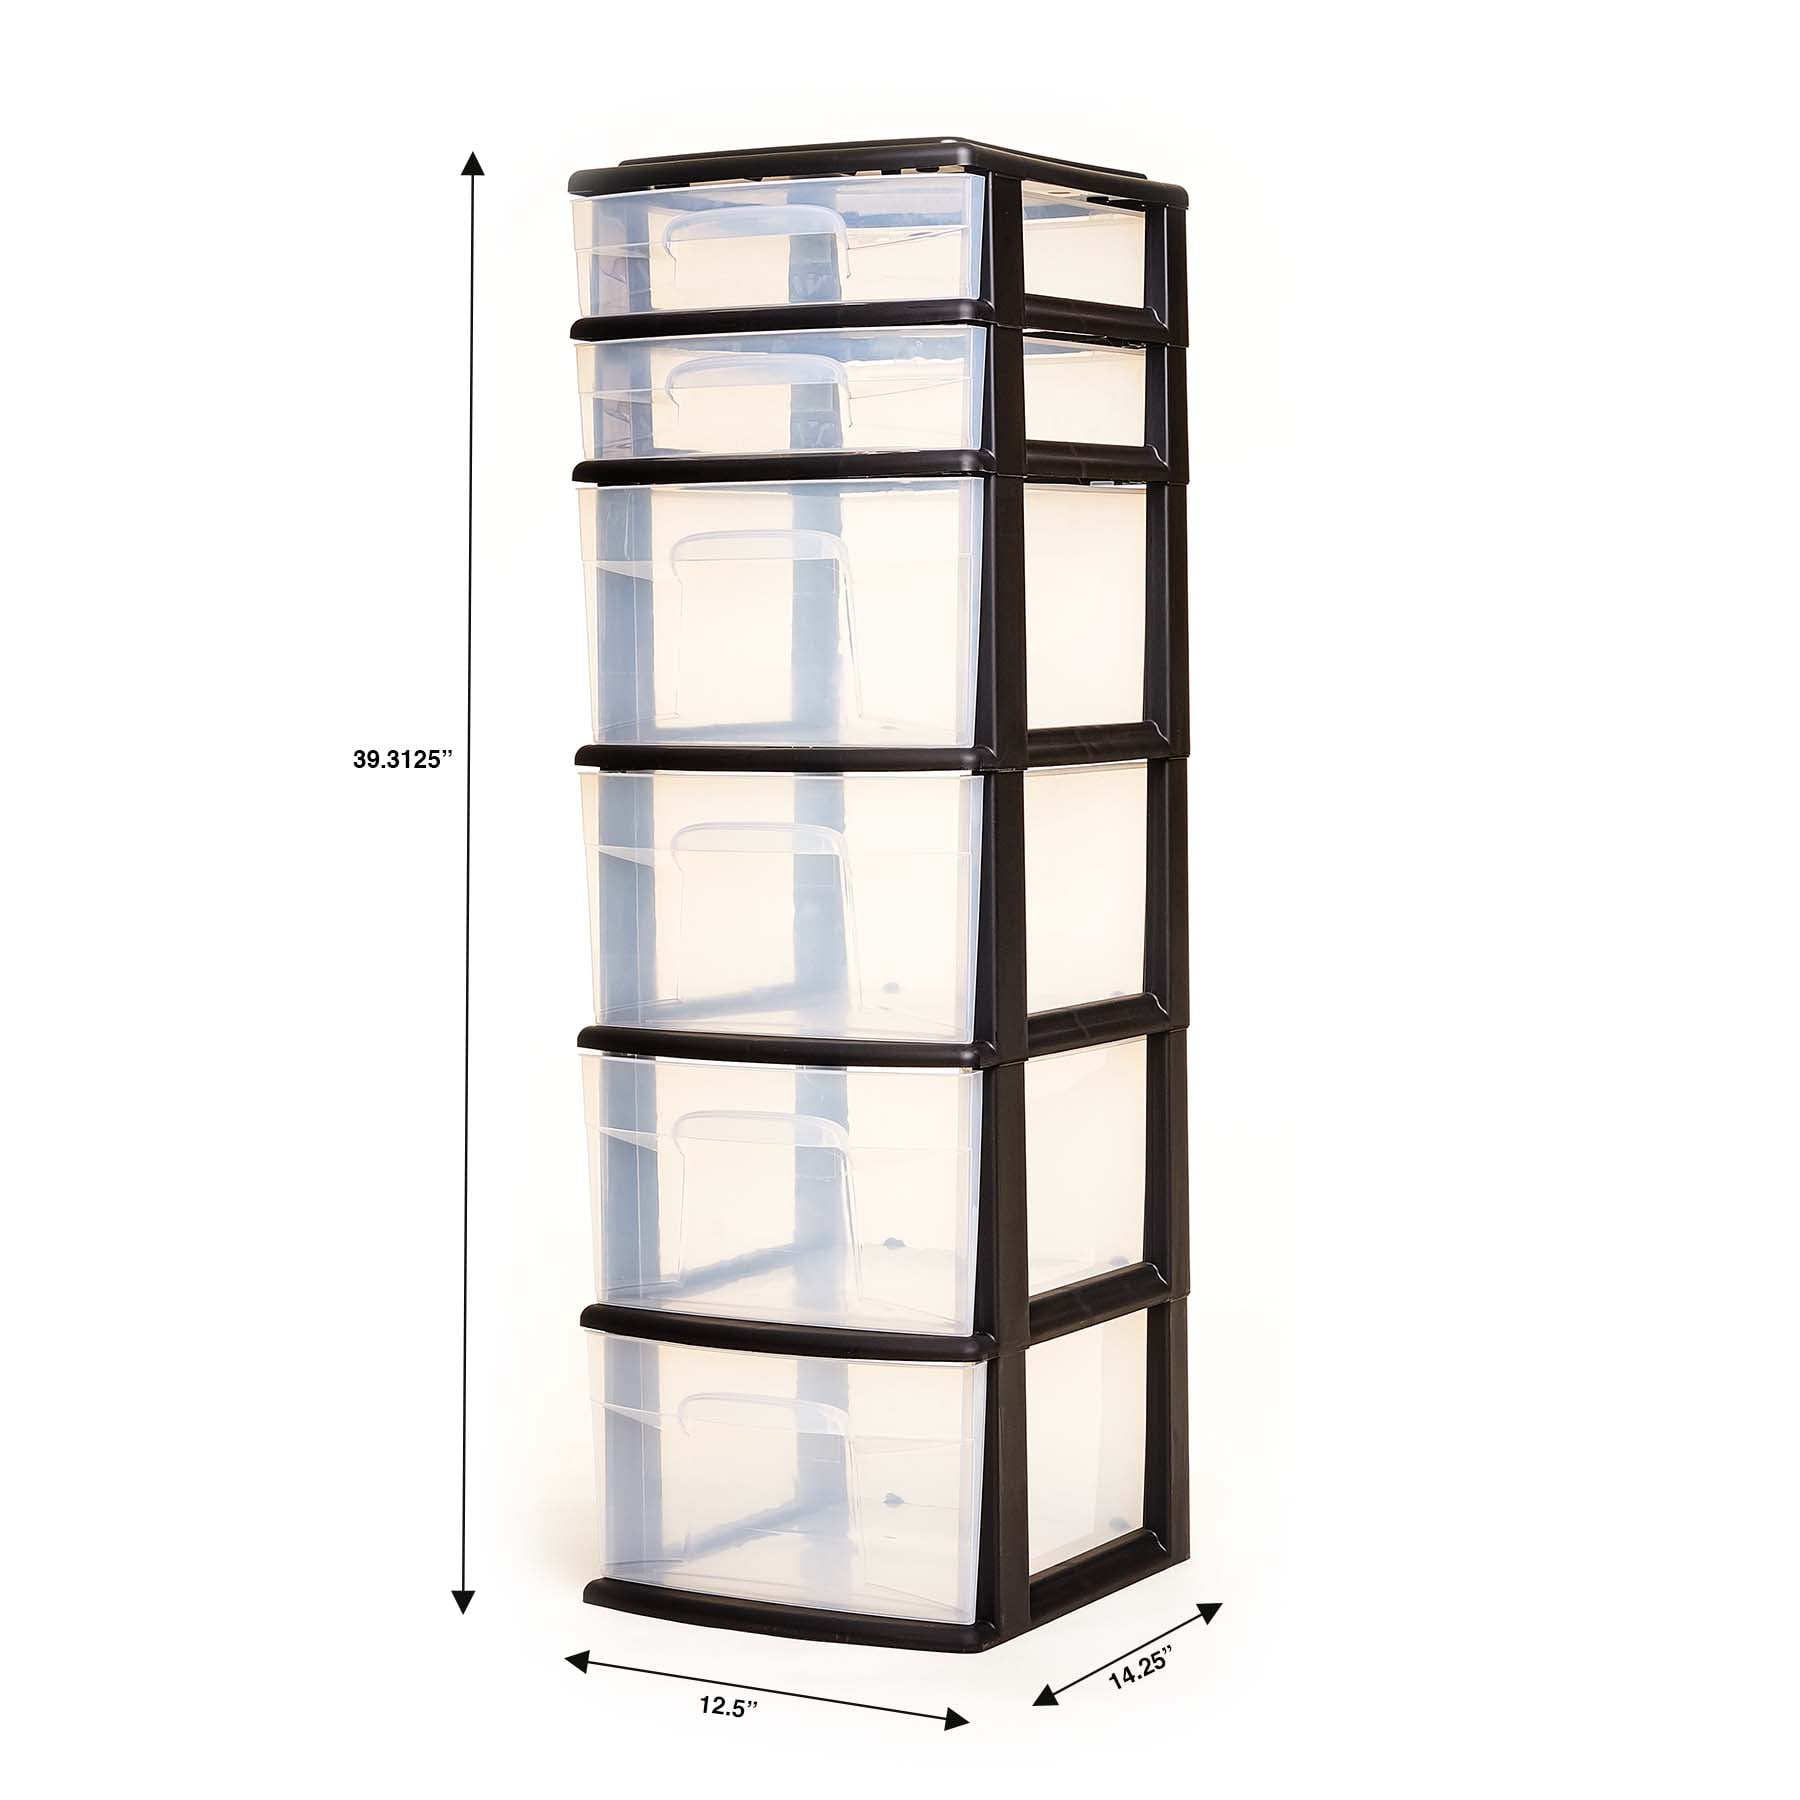 Homz® 6 Drawer Medium Tower, Black Plastic Frame with Clear Drawers, Set of 1 - 1